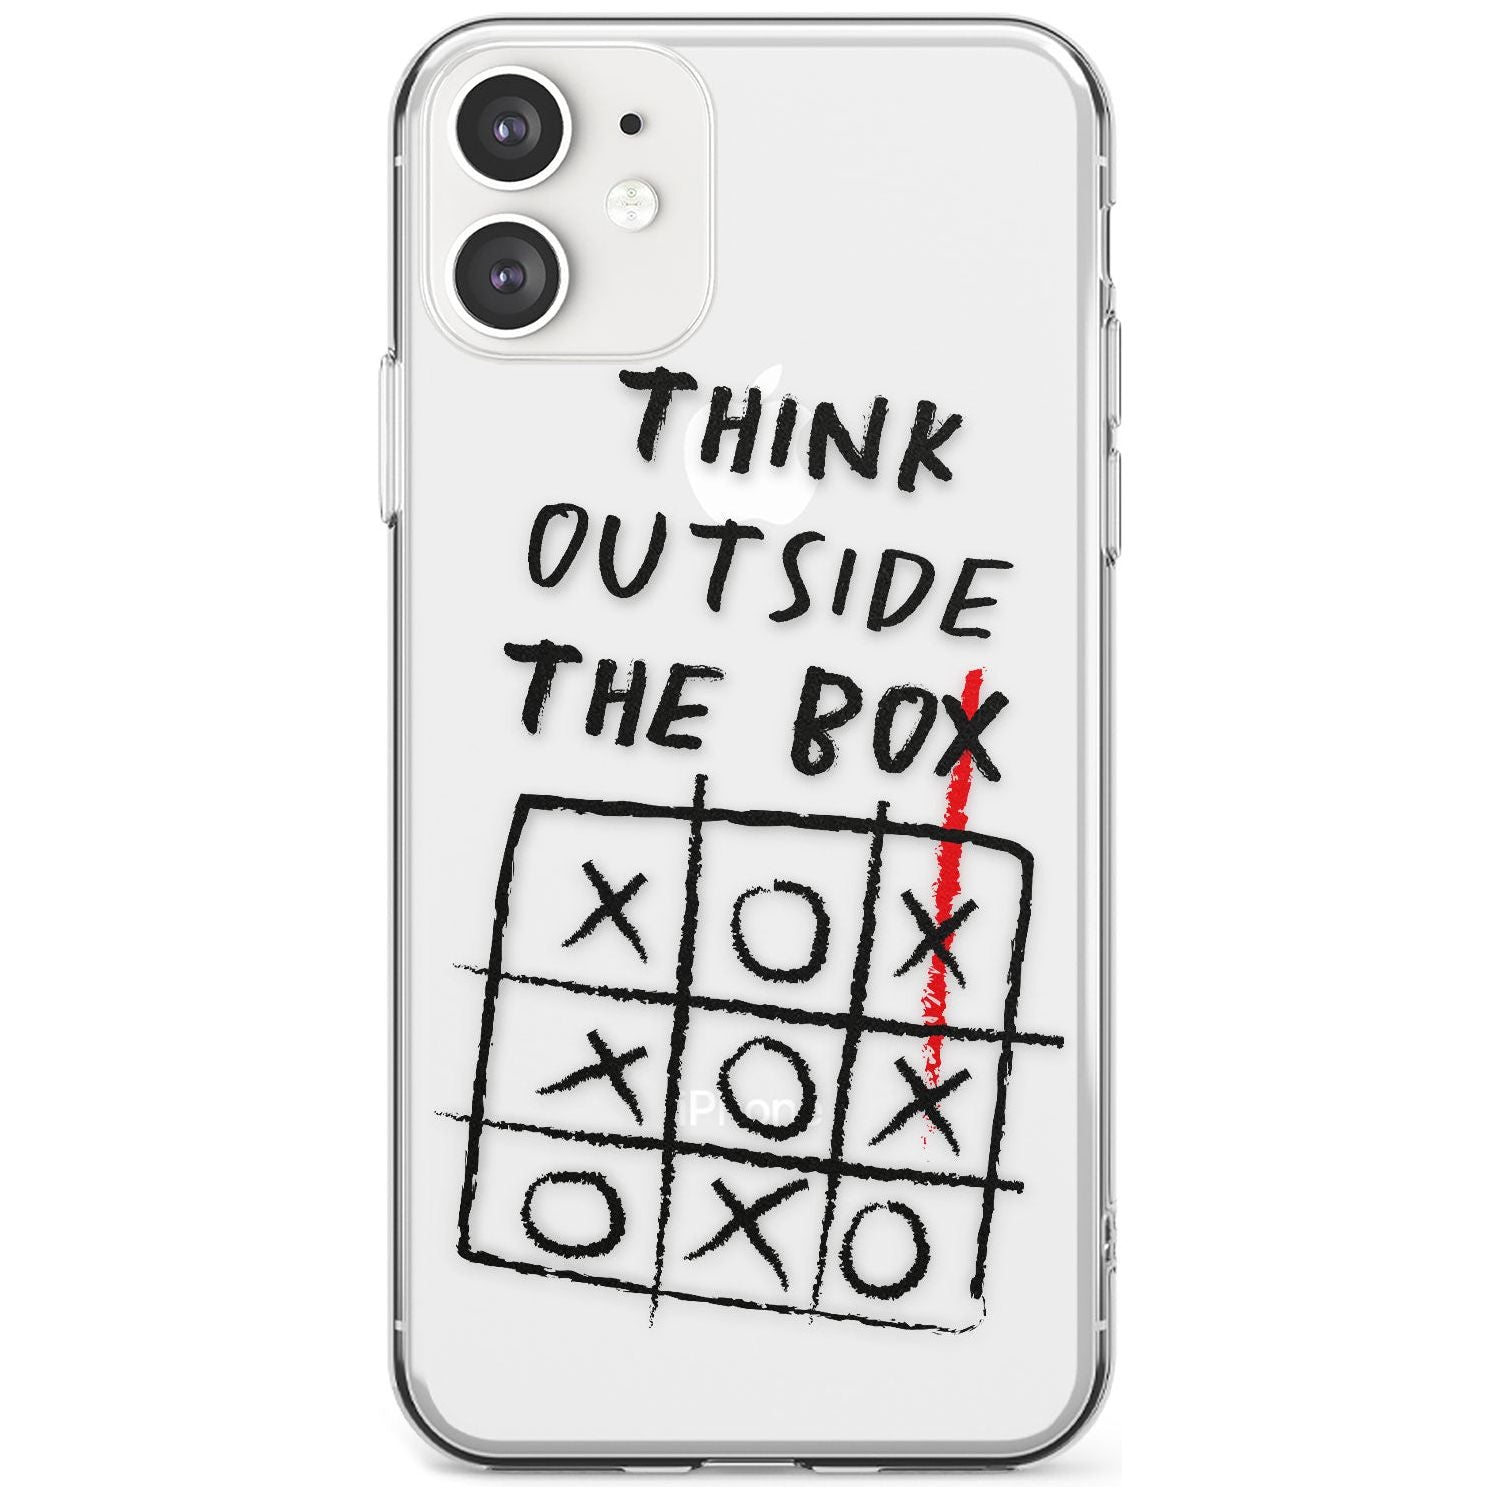 "Think Outside the Box" Slim TPU Phone Case for iPhone 11